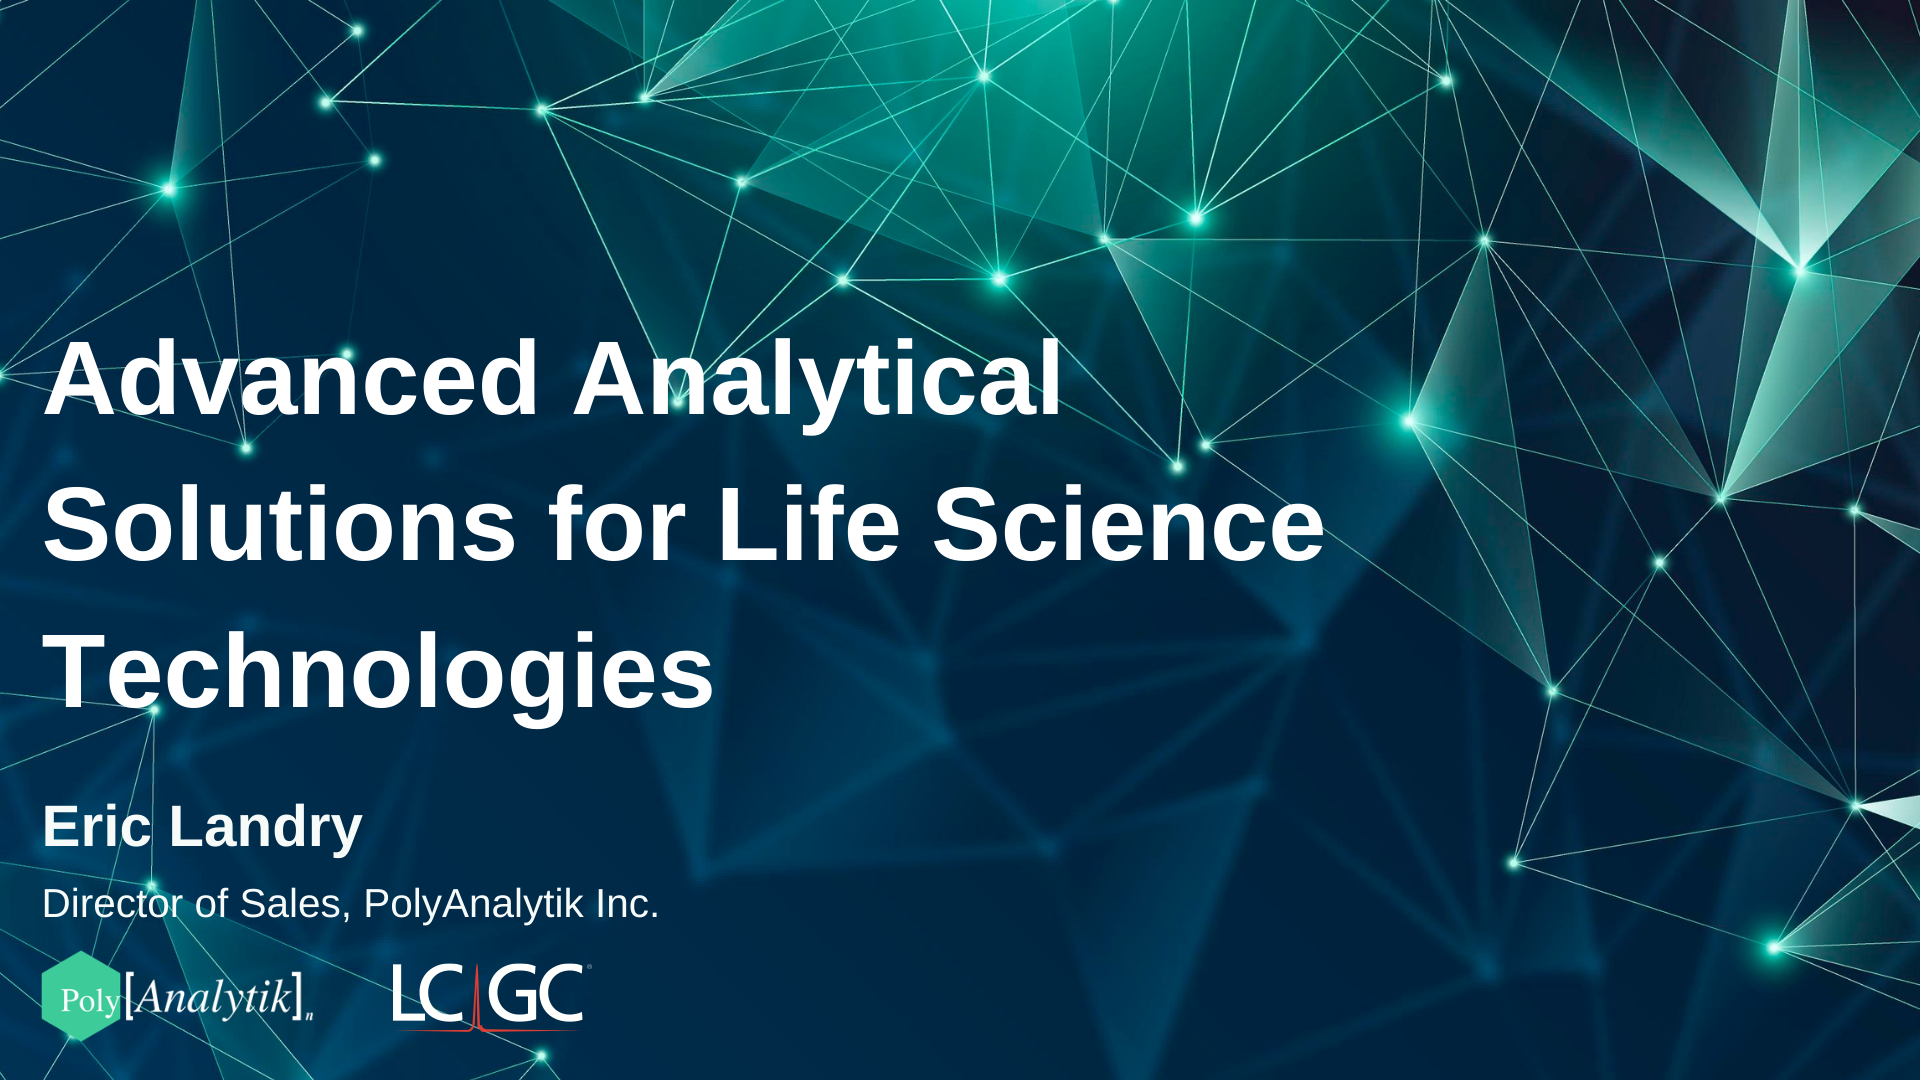 Advanced Analytical Solutions for Life Science Technologies